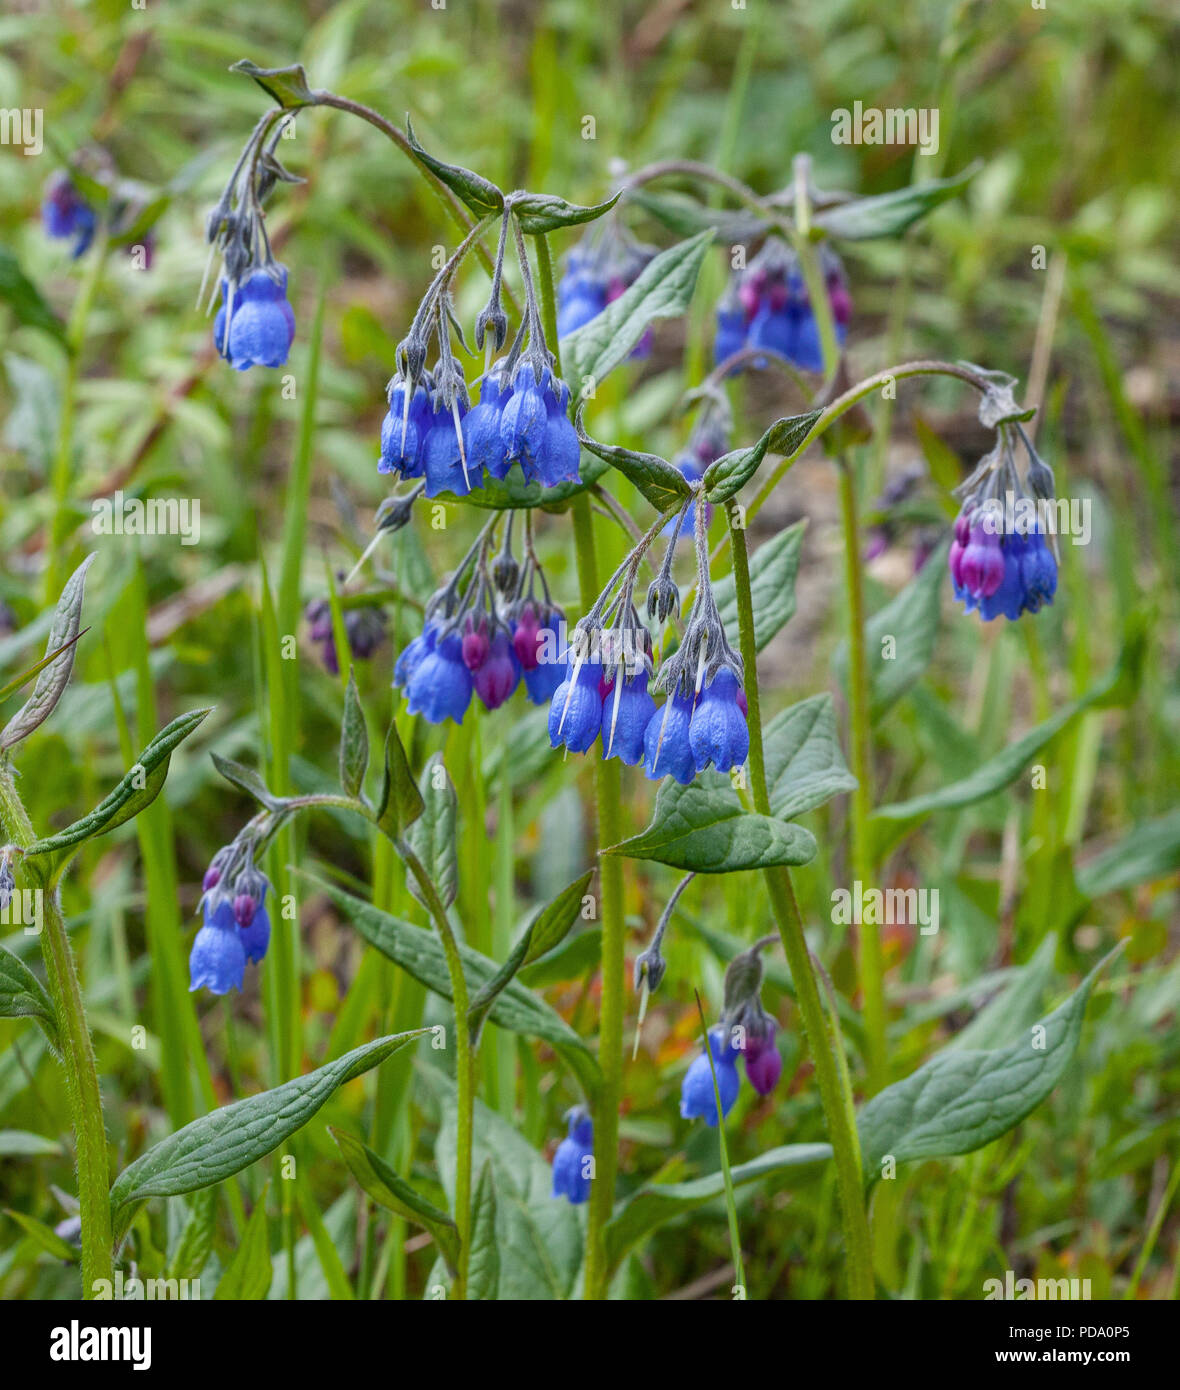 A group of beautiful Tall Bluebell Flowers (Mertensia paniculata) blooming in Nome, Alaska Stock Photo